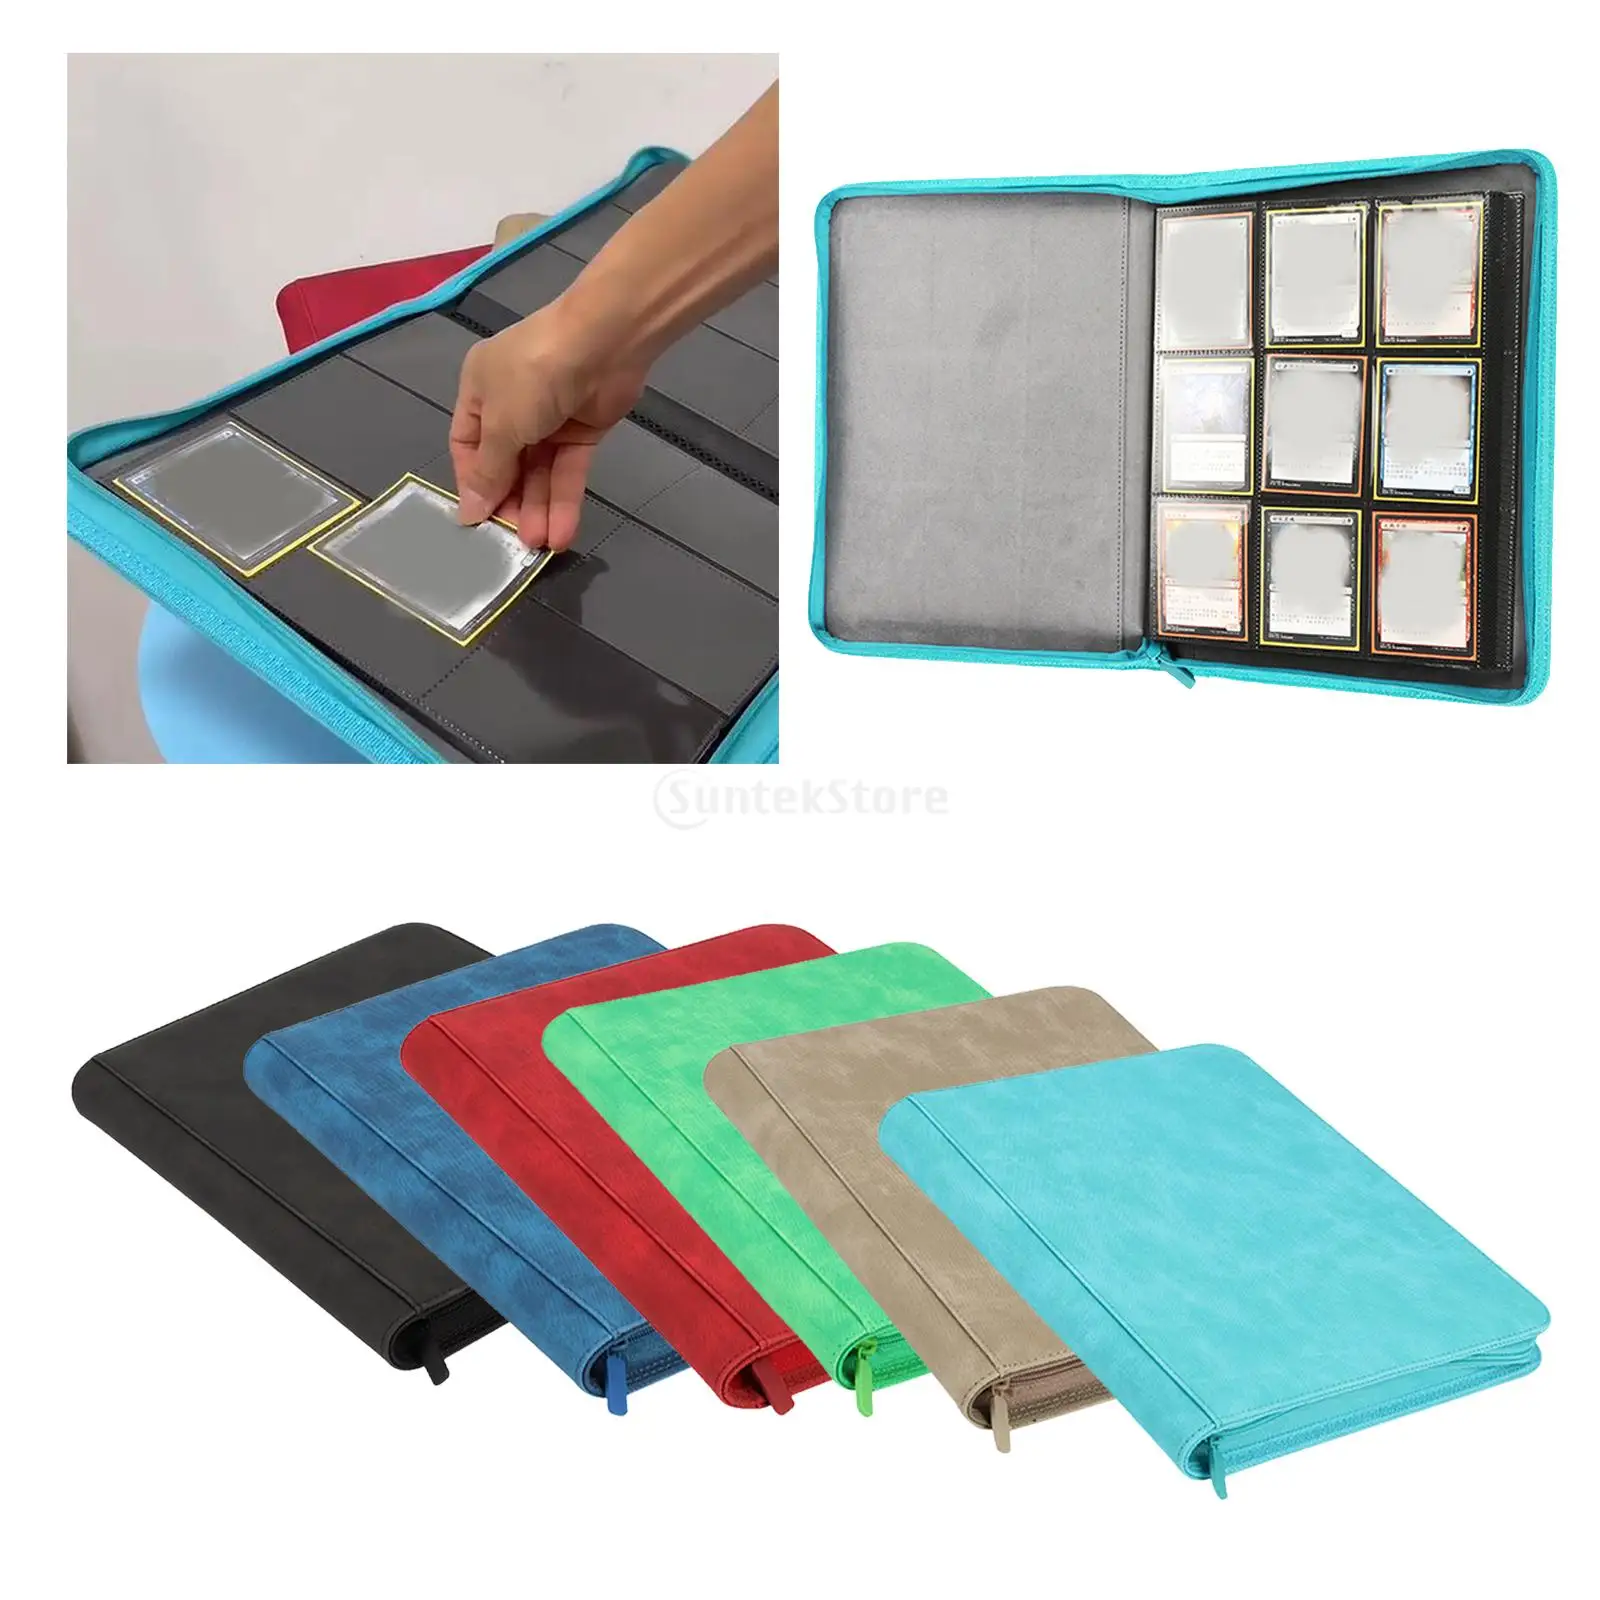 Trading Card Binder with 9-Pocket Plastic Sleeves, Zipper